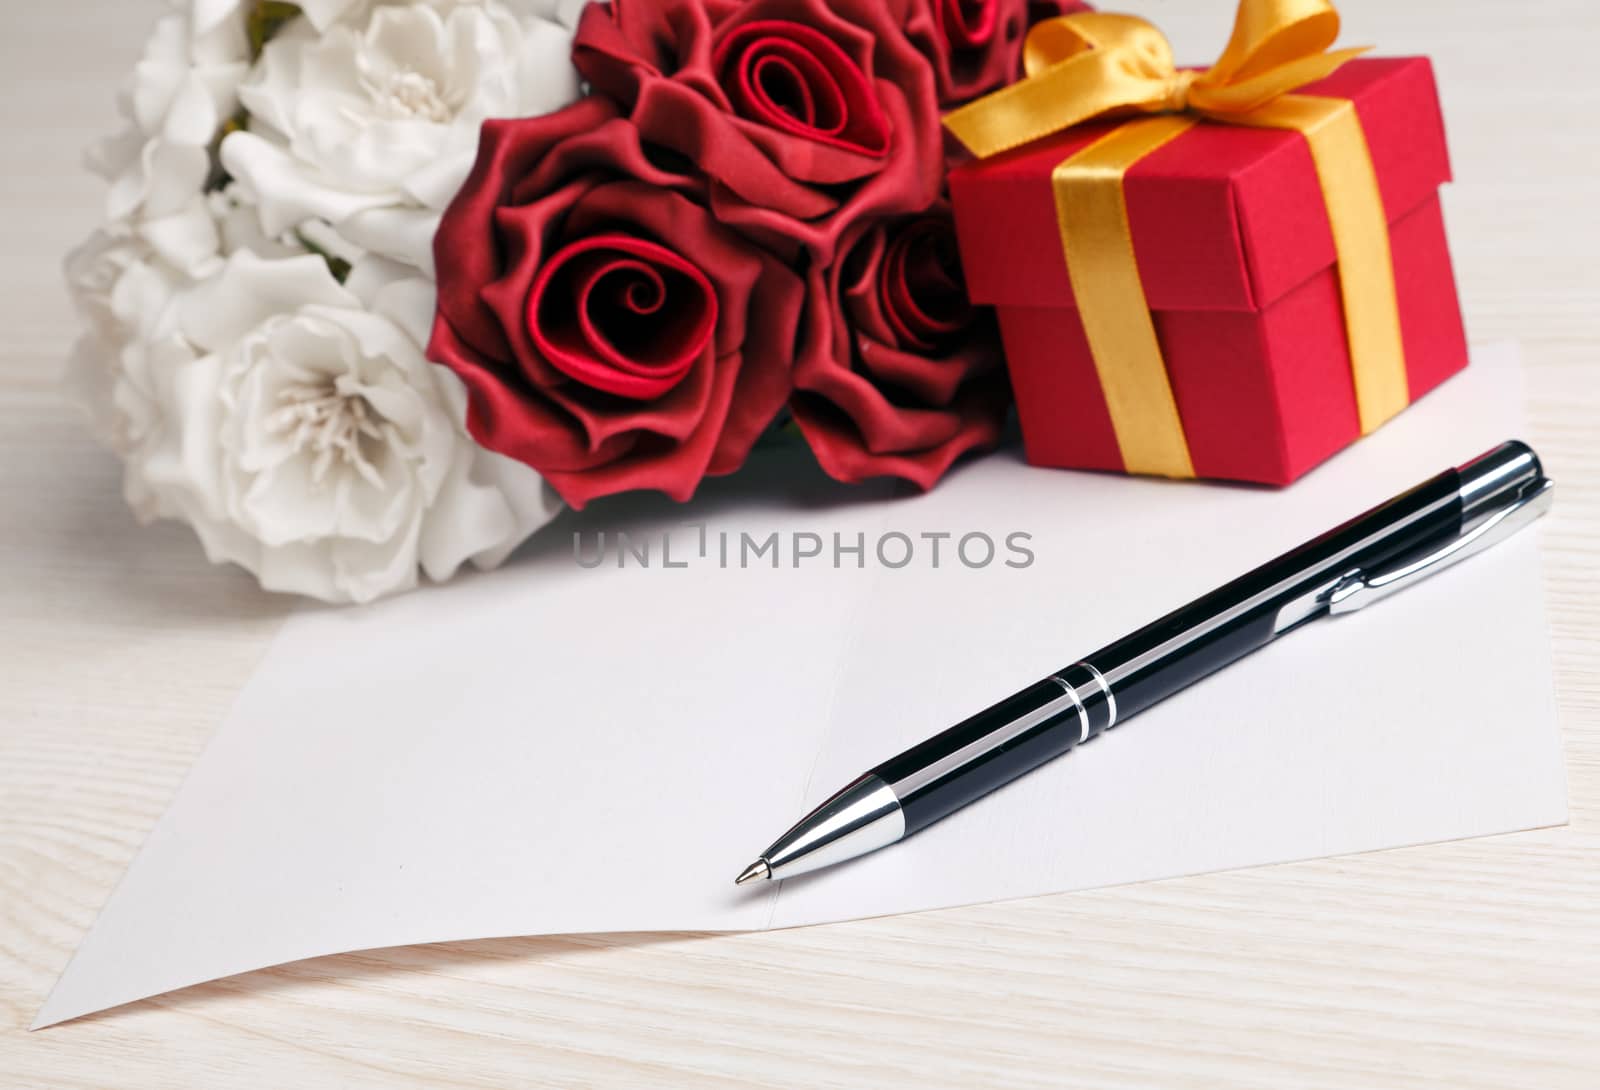 Greeting blank card with pen, rose and red box with yellow ribbon